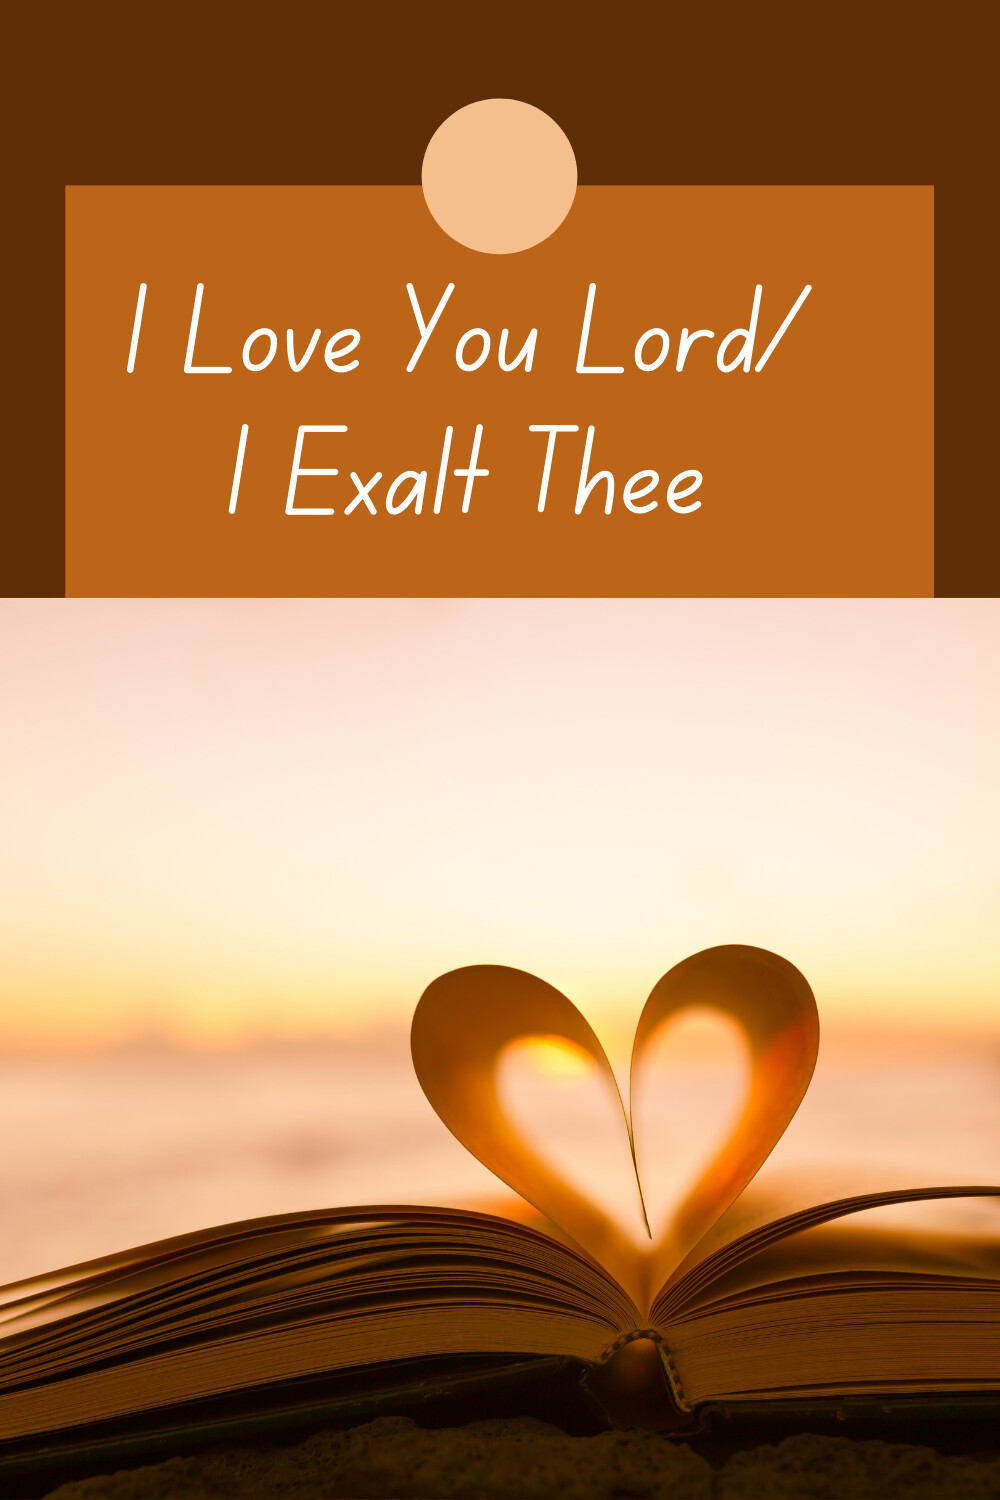 I Love You Lord/I Exalt Thee